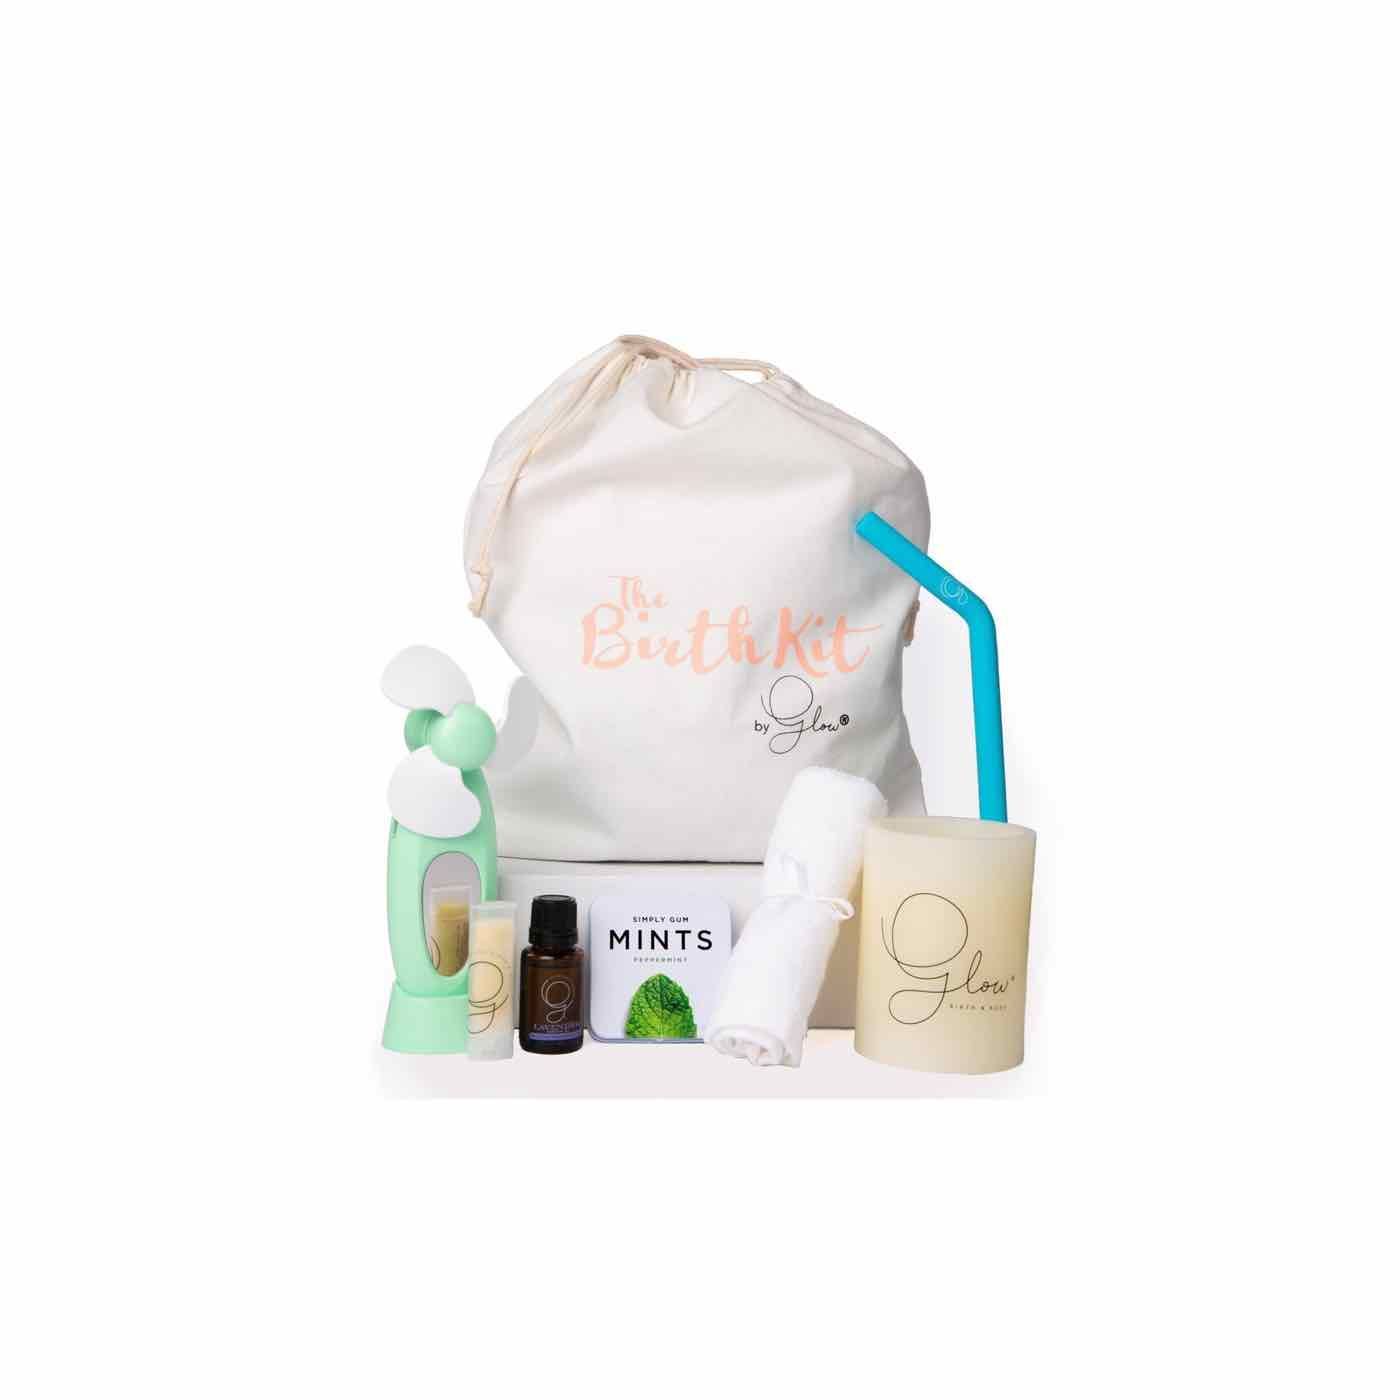 pamper gifts for pregnant ladies